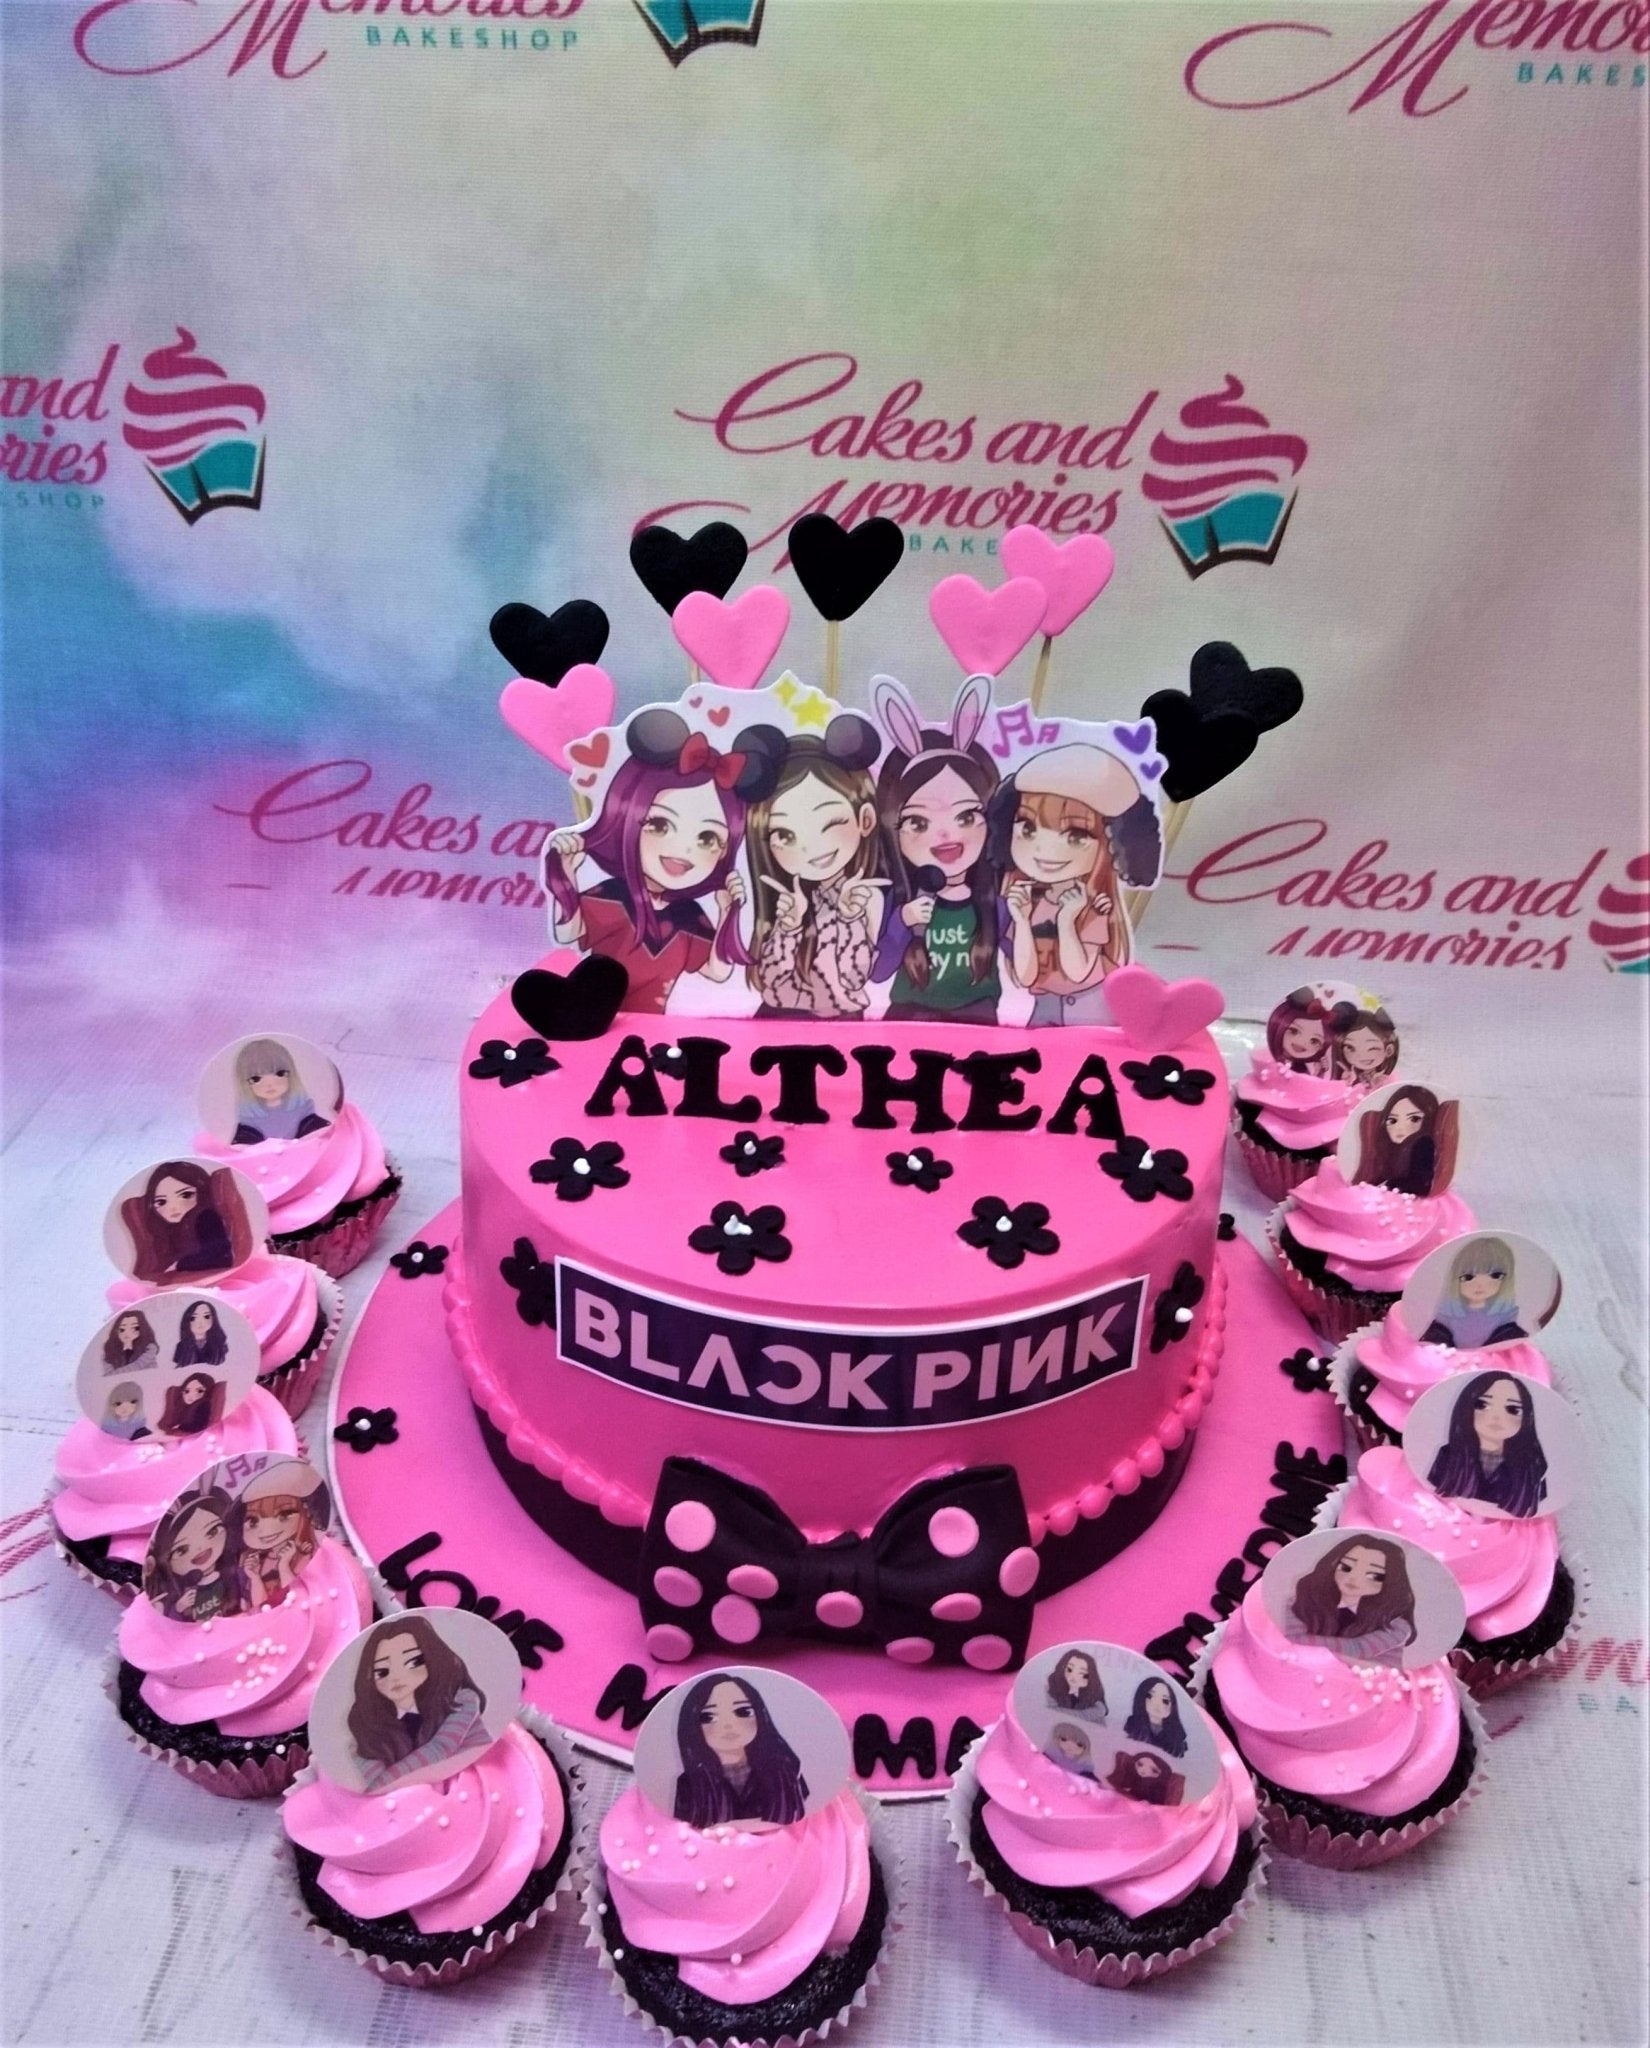 Blackpink Ice Cream Cake | Must have for Blinks | Cake Delivery in Klang  Valley – Kindori Moments Sdn Bhd (796564-U)